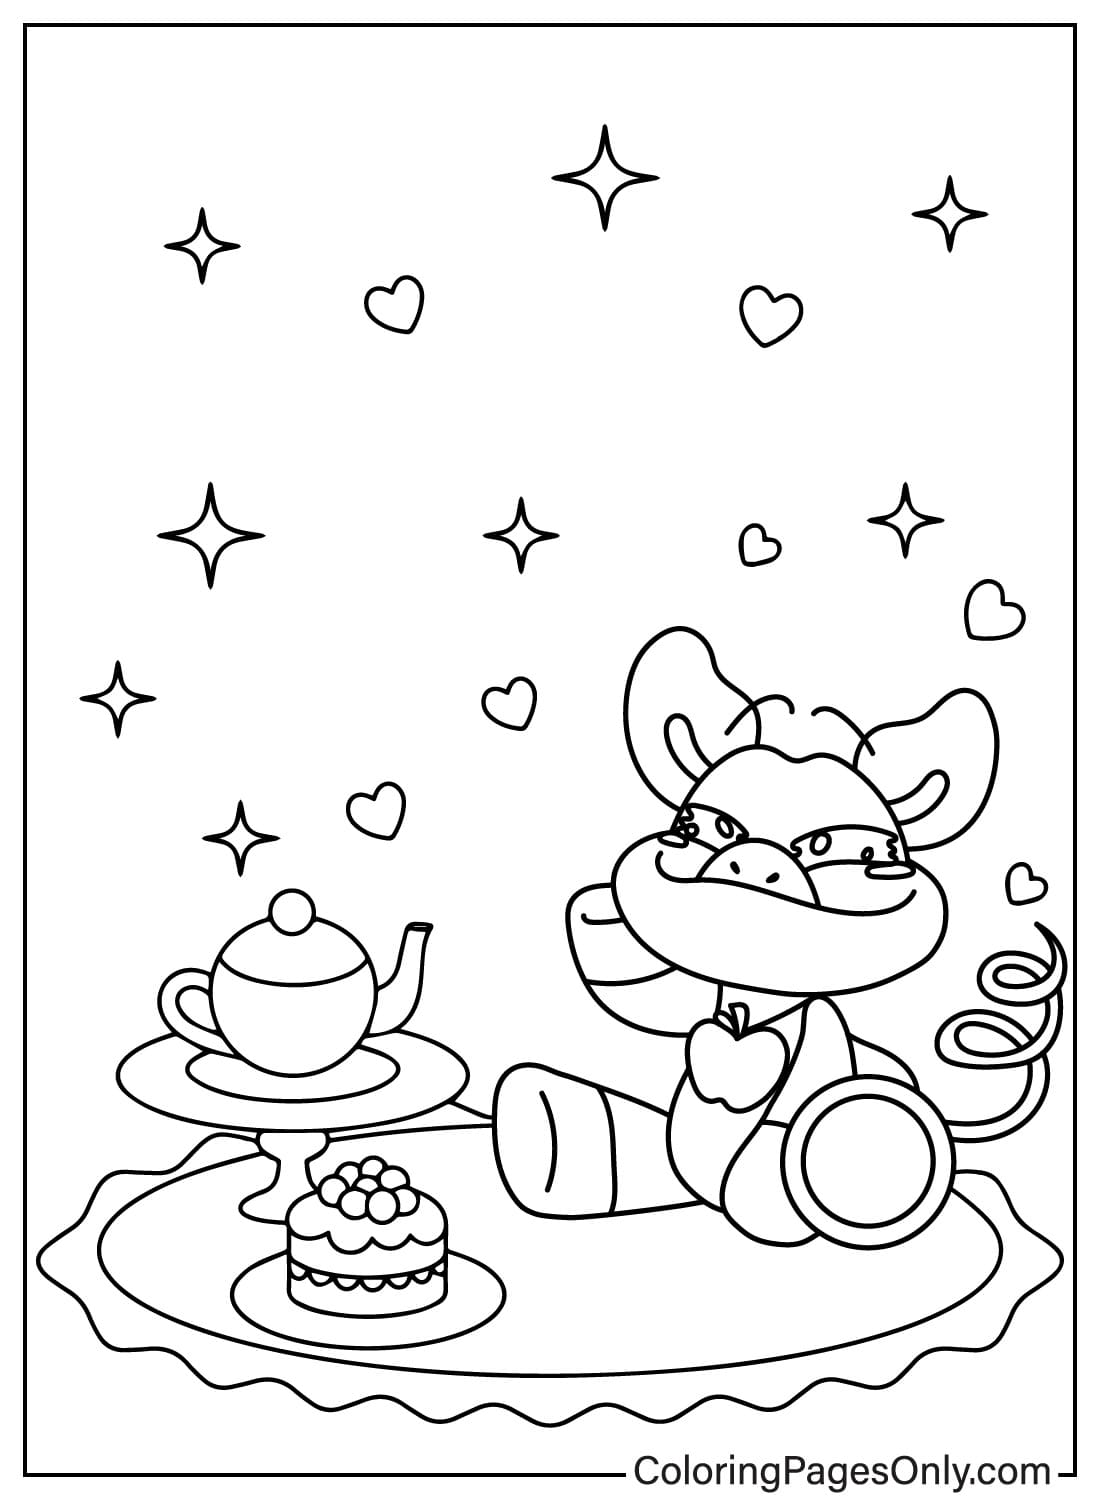 Pictures PickyPiggy Coloring sheet from PickyPiggy